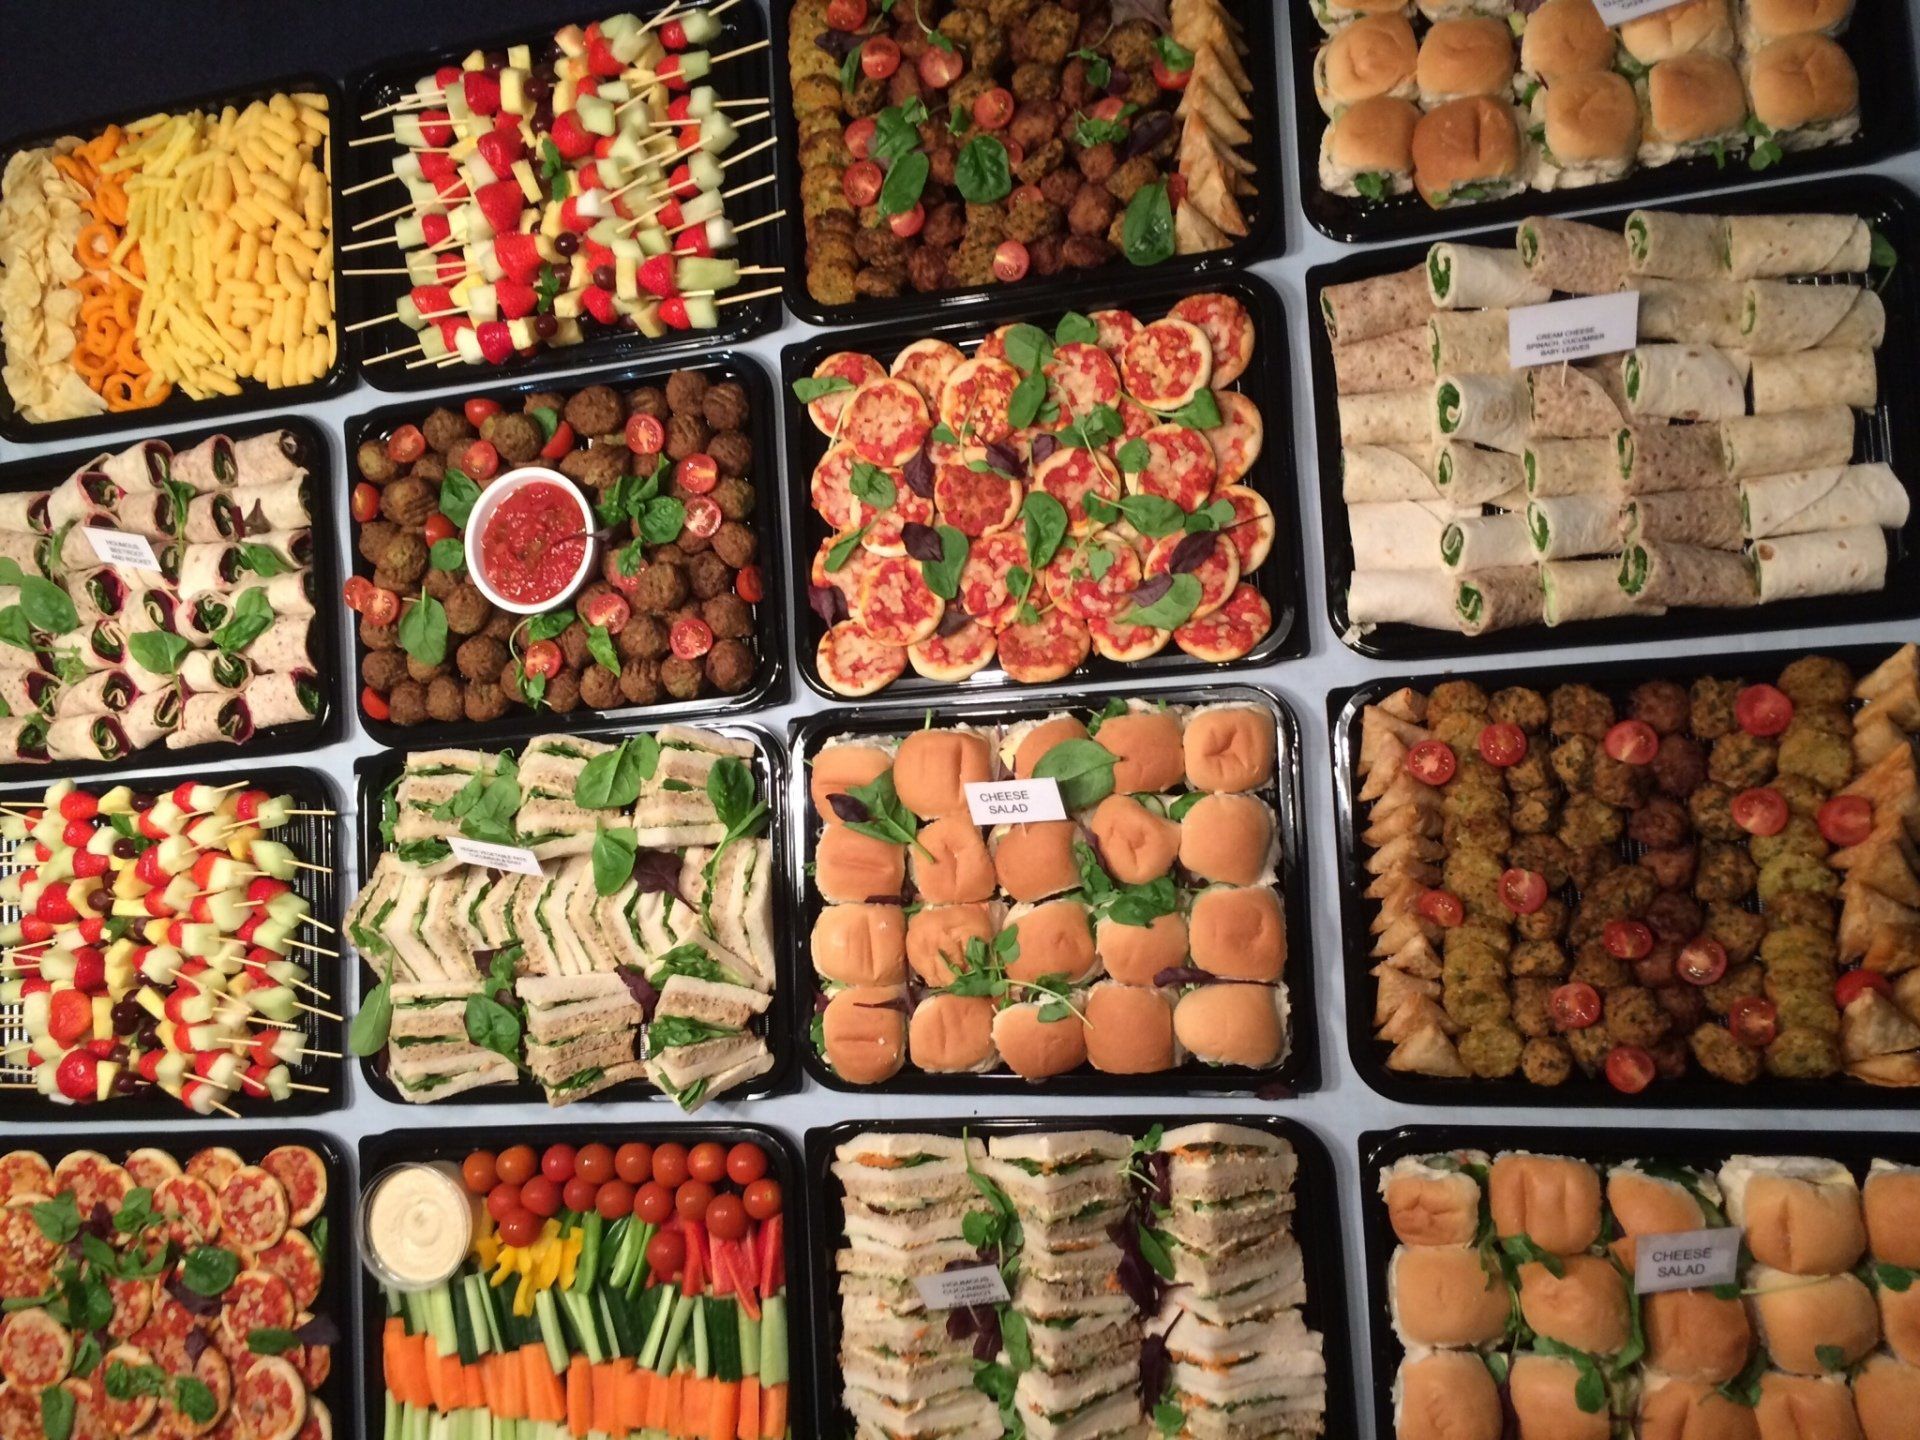 Catering services in Southend